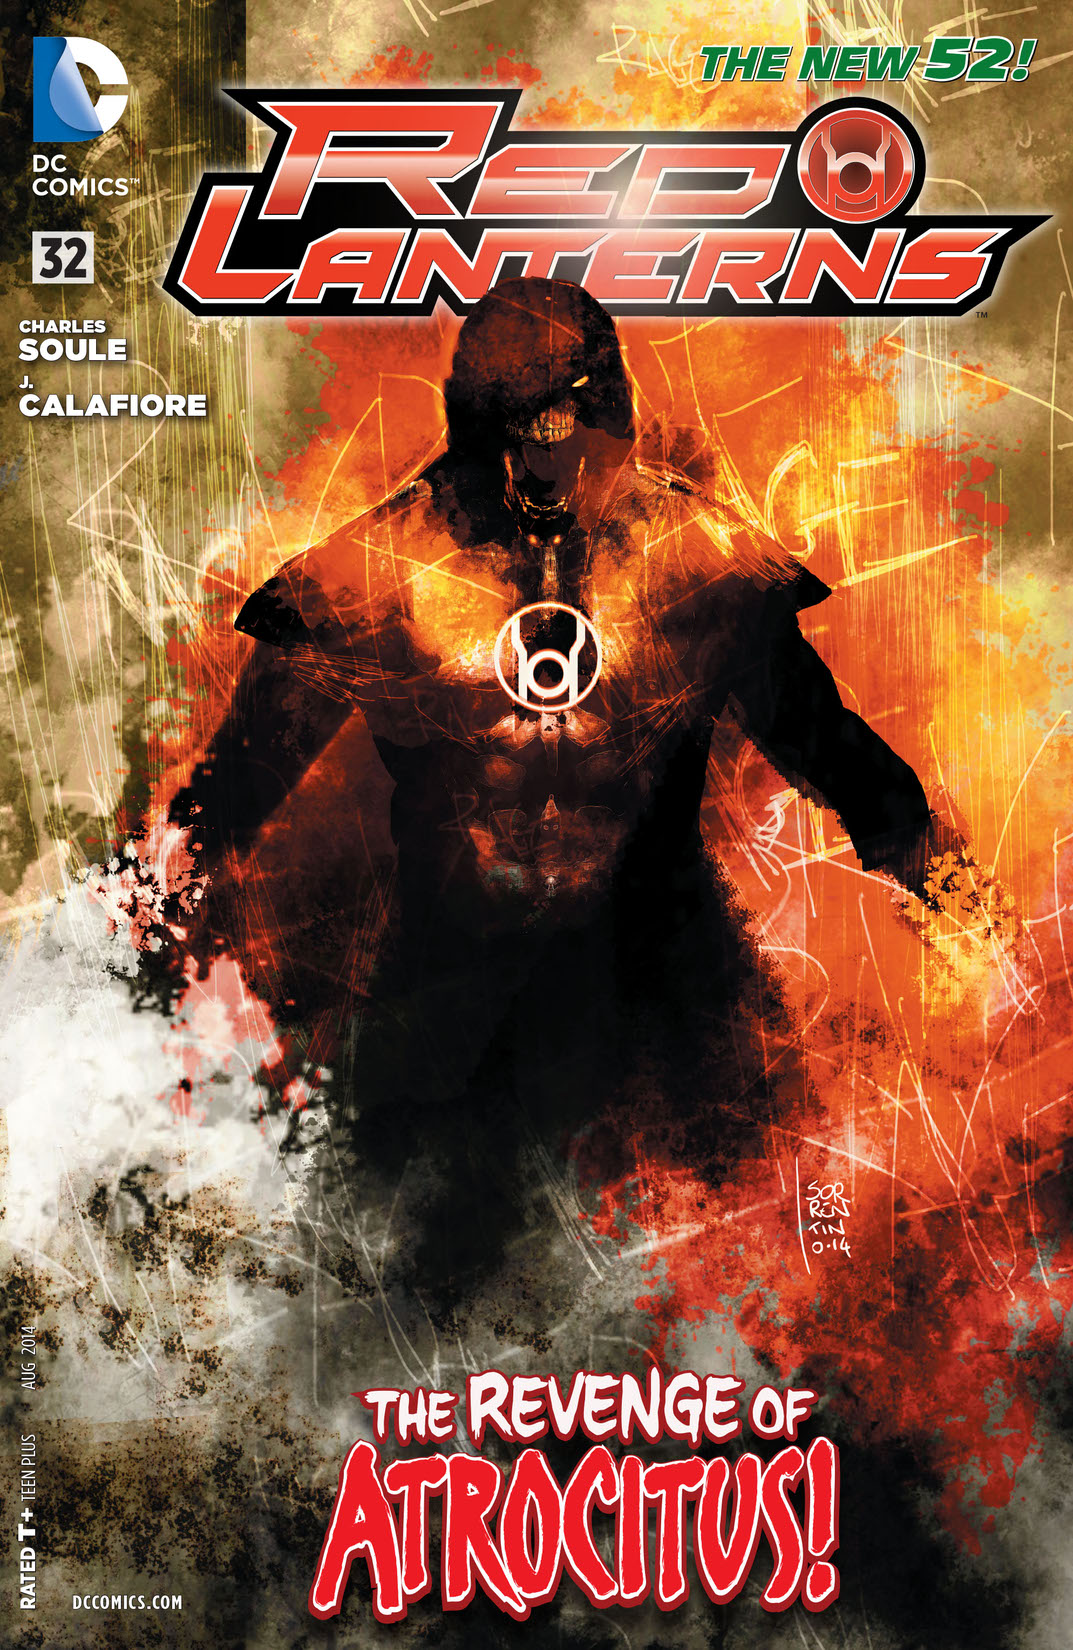 Red Lanterns #32 preview images